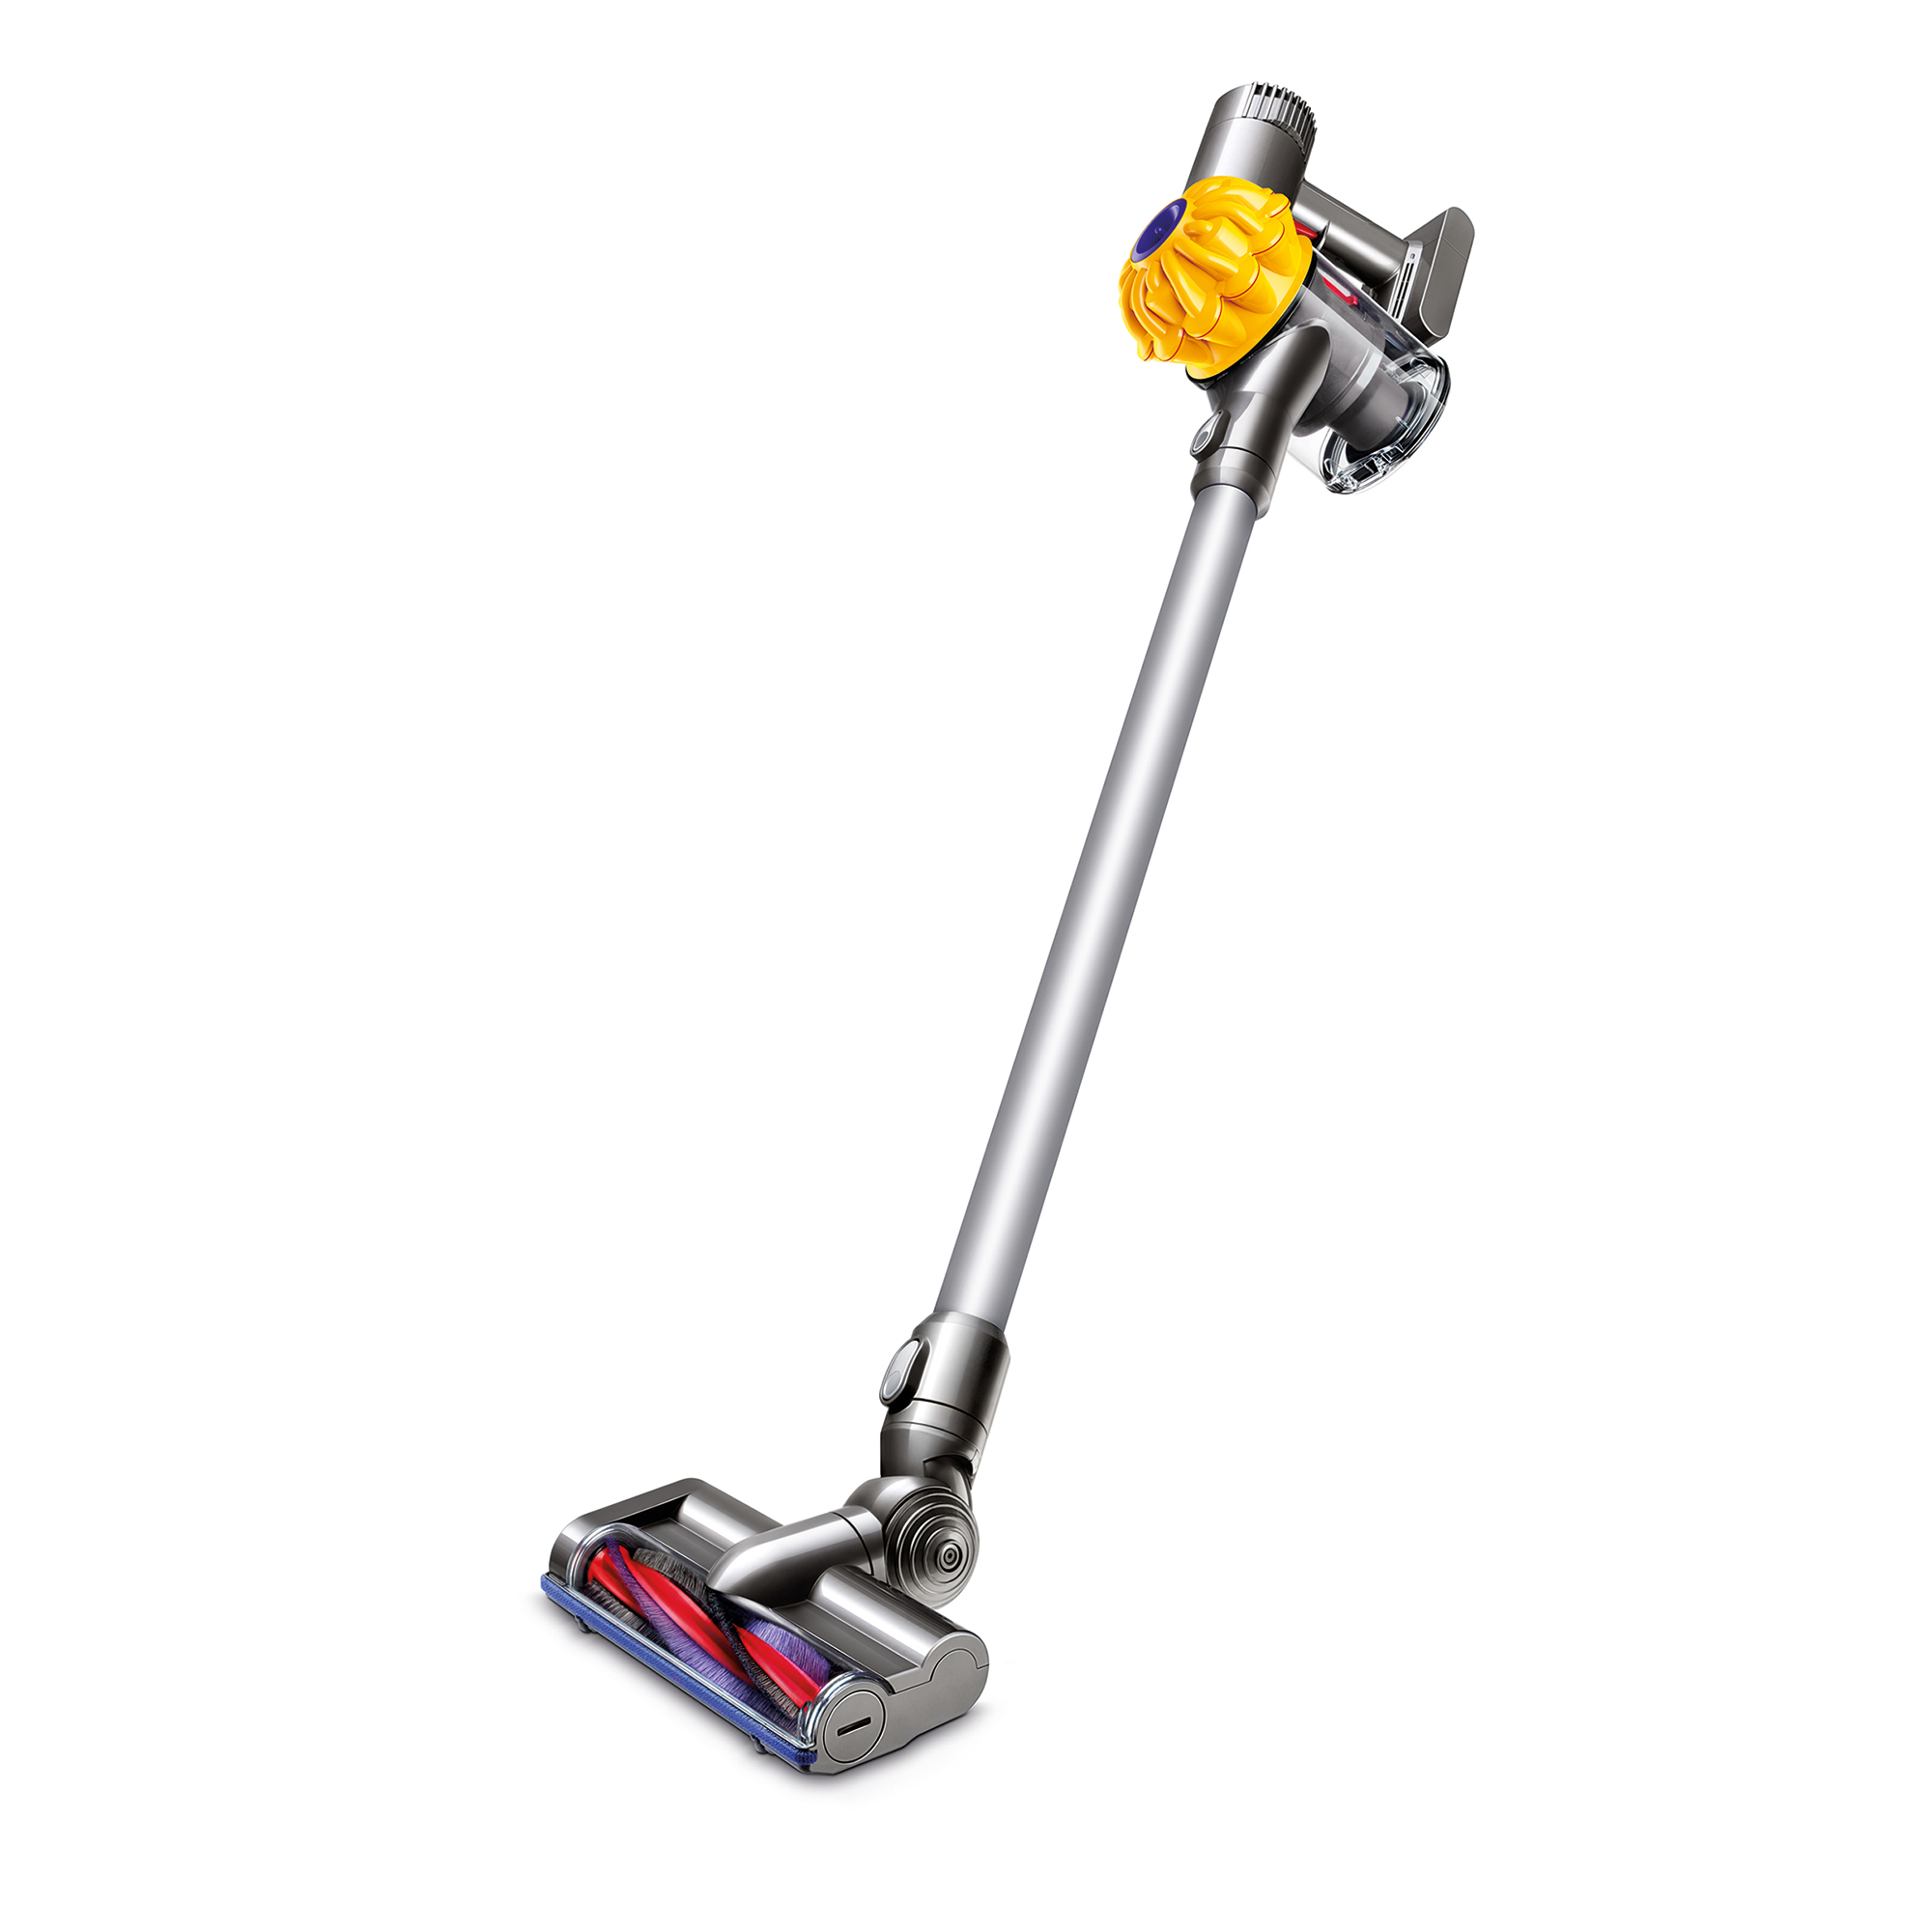 Dyson cordless vacuum with v6 motor for $149